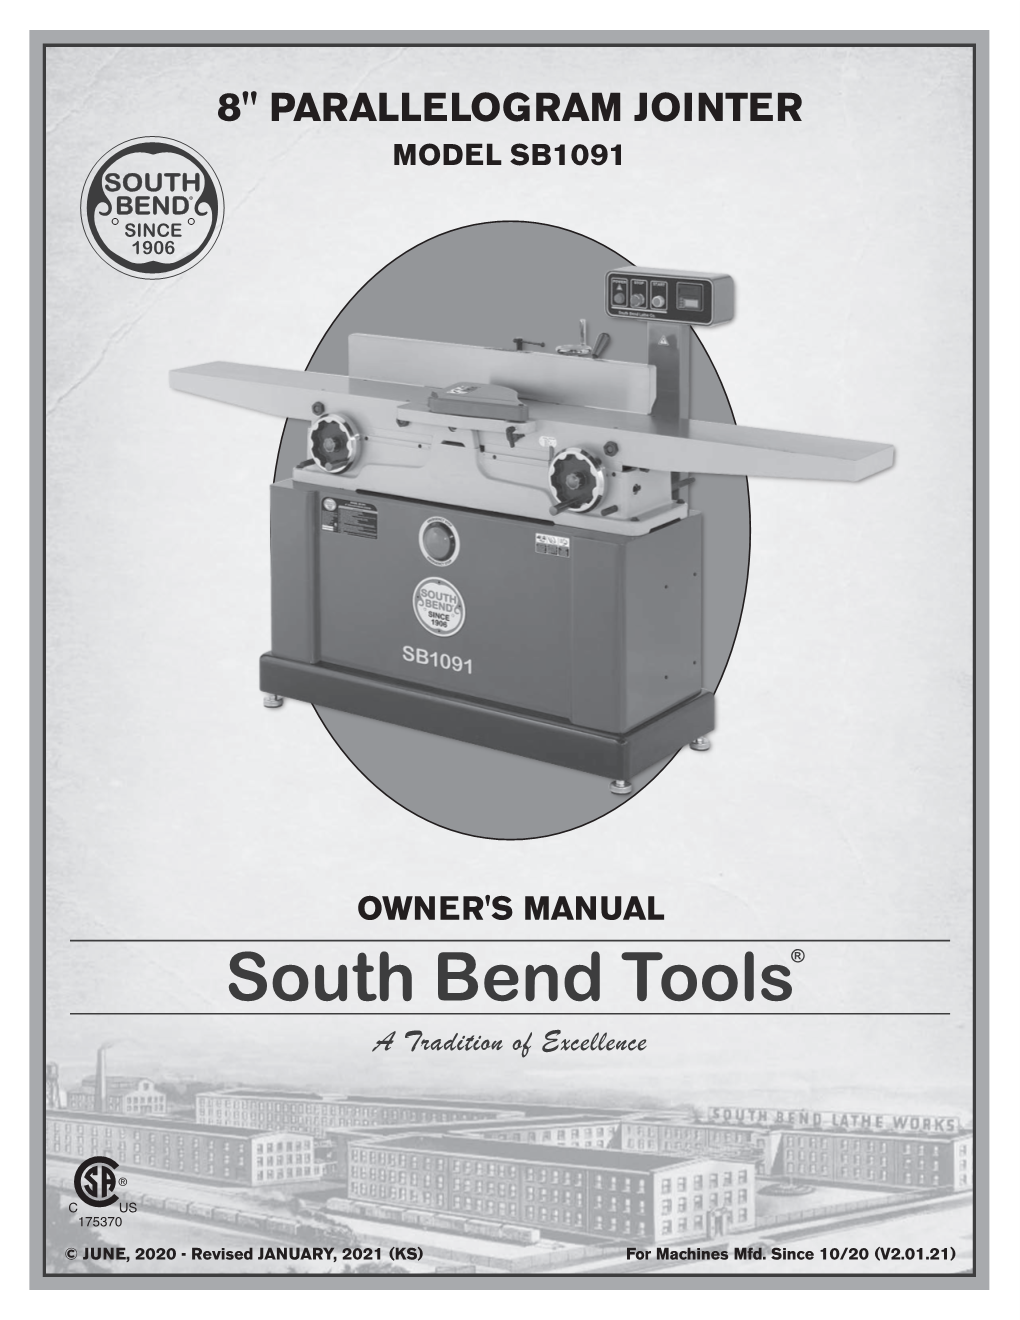 South Bend Tools® a Tradition of Excellence